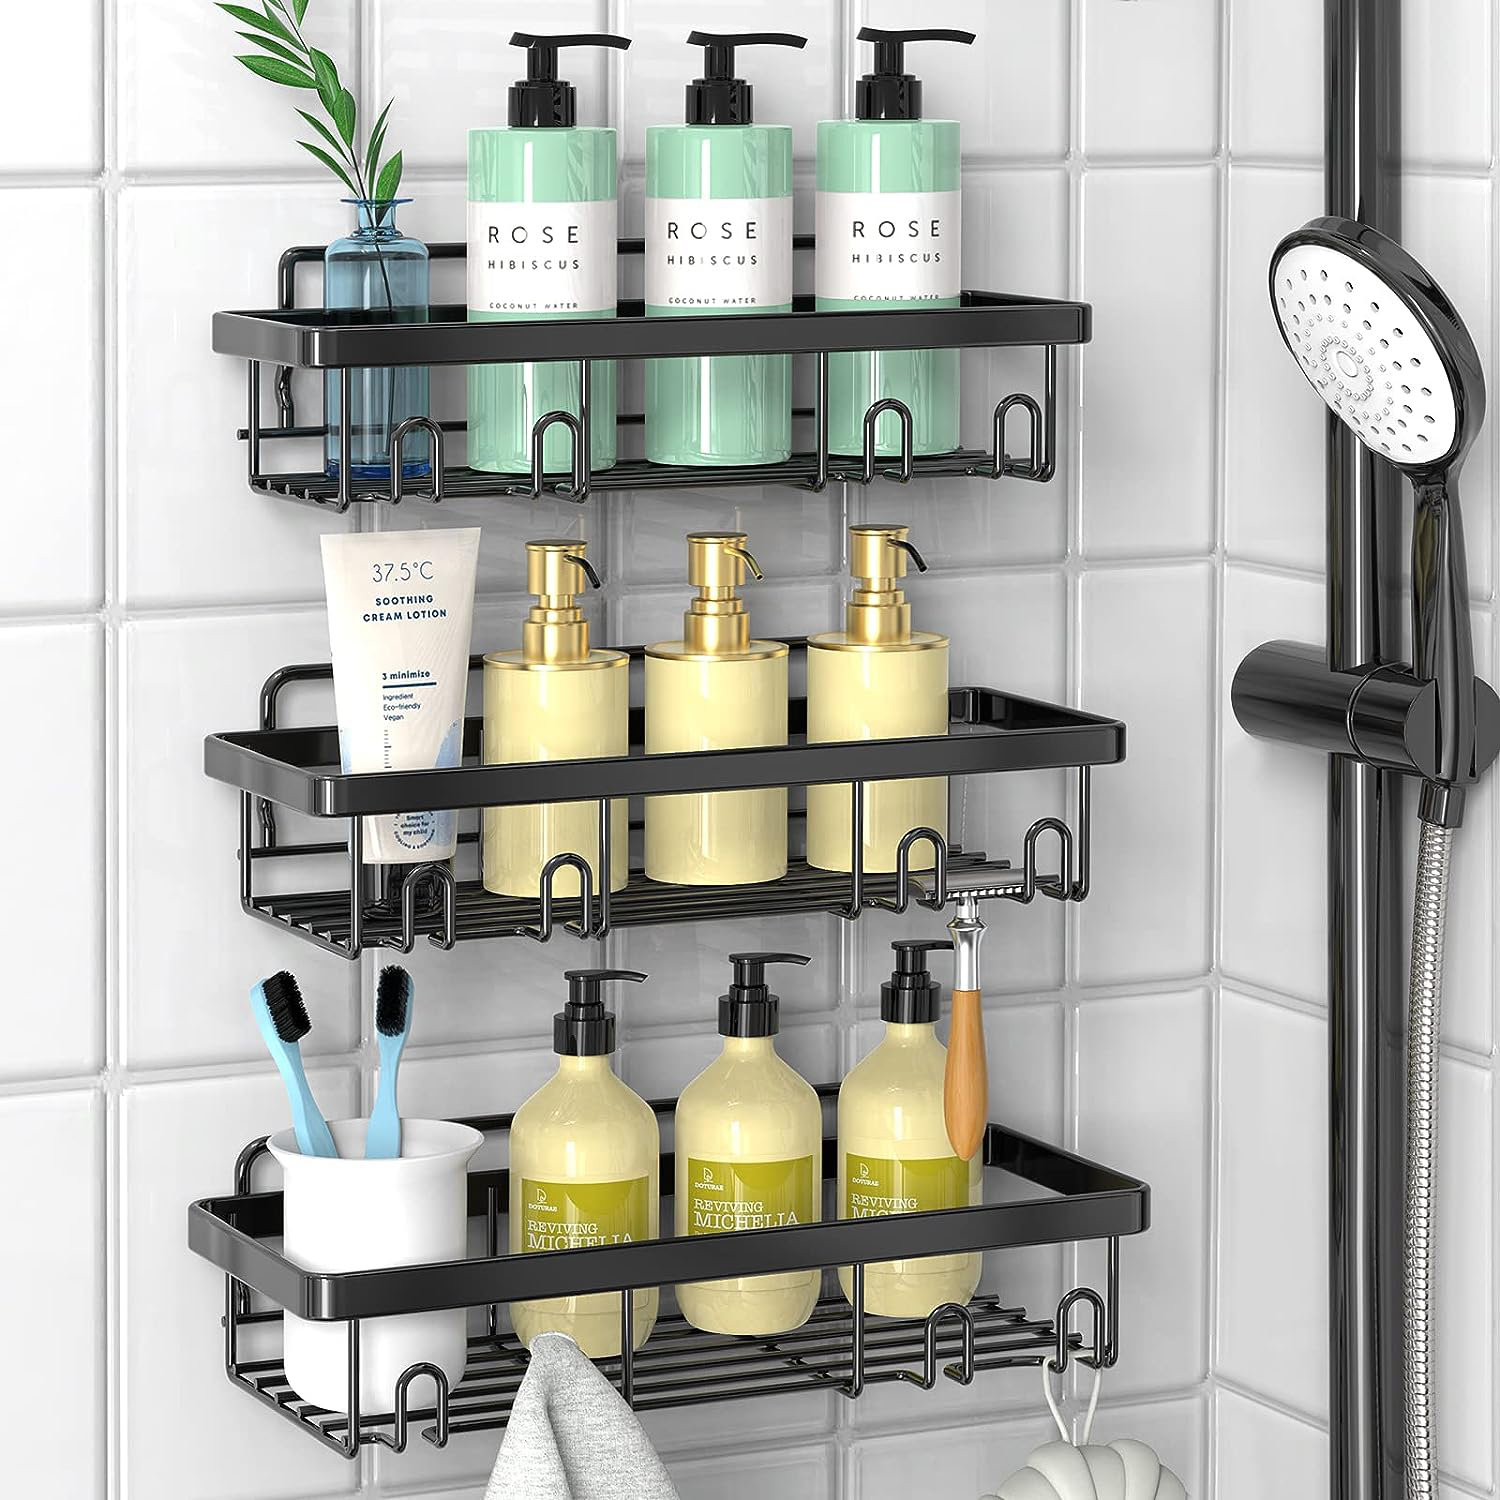 Shower Caddy Adhesive Shower Shelf No Drilling Stick on Shower Organizer  for Tile Wall Shower Storage Rustproof Bathroom Caddy Wall Mounted for